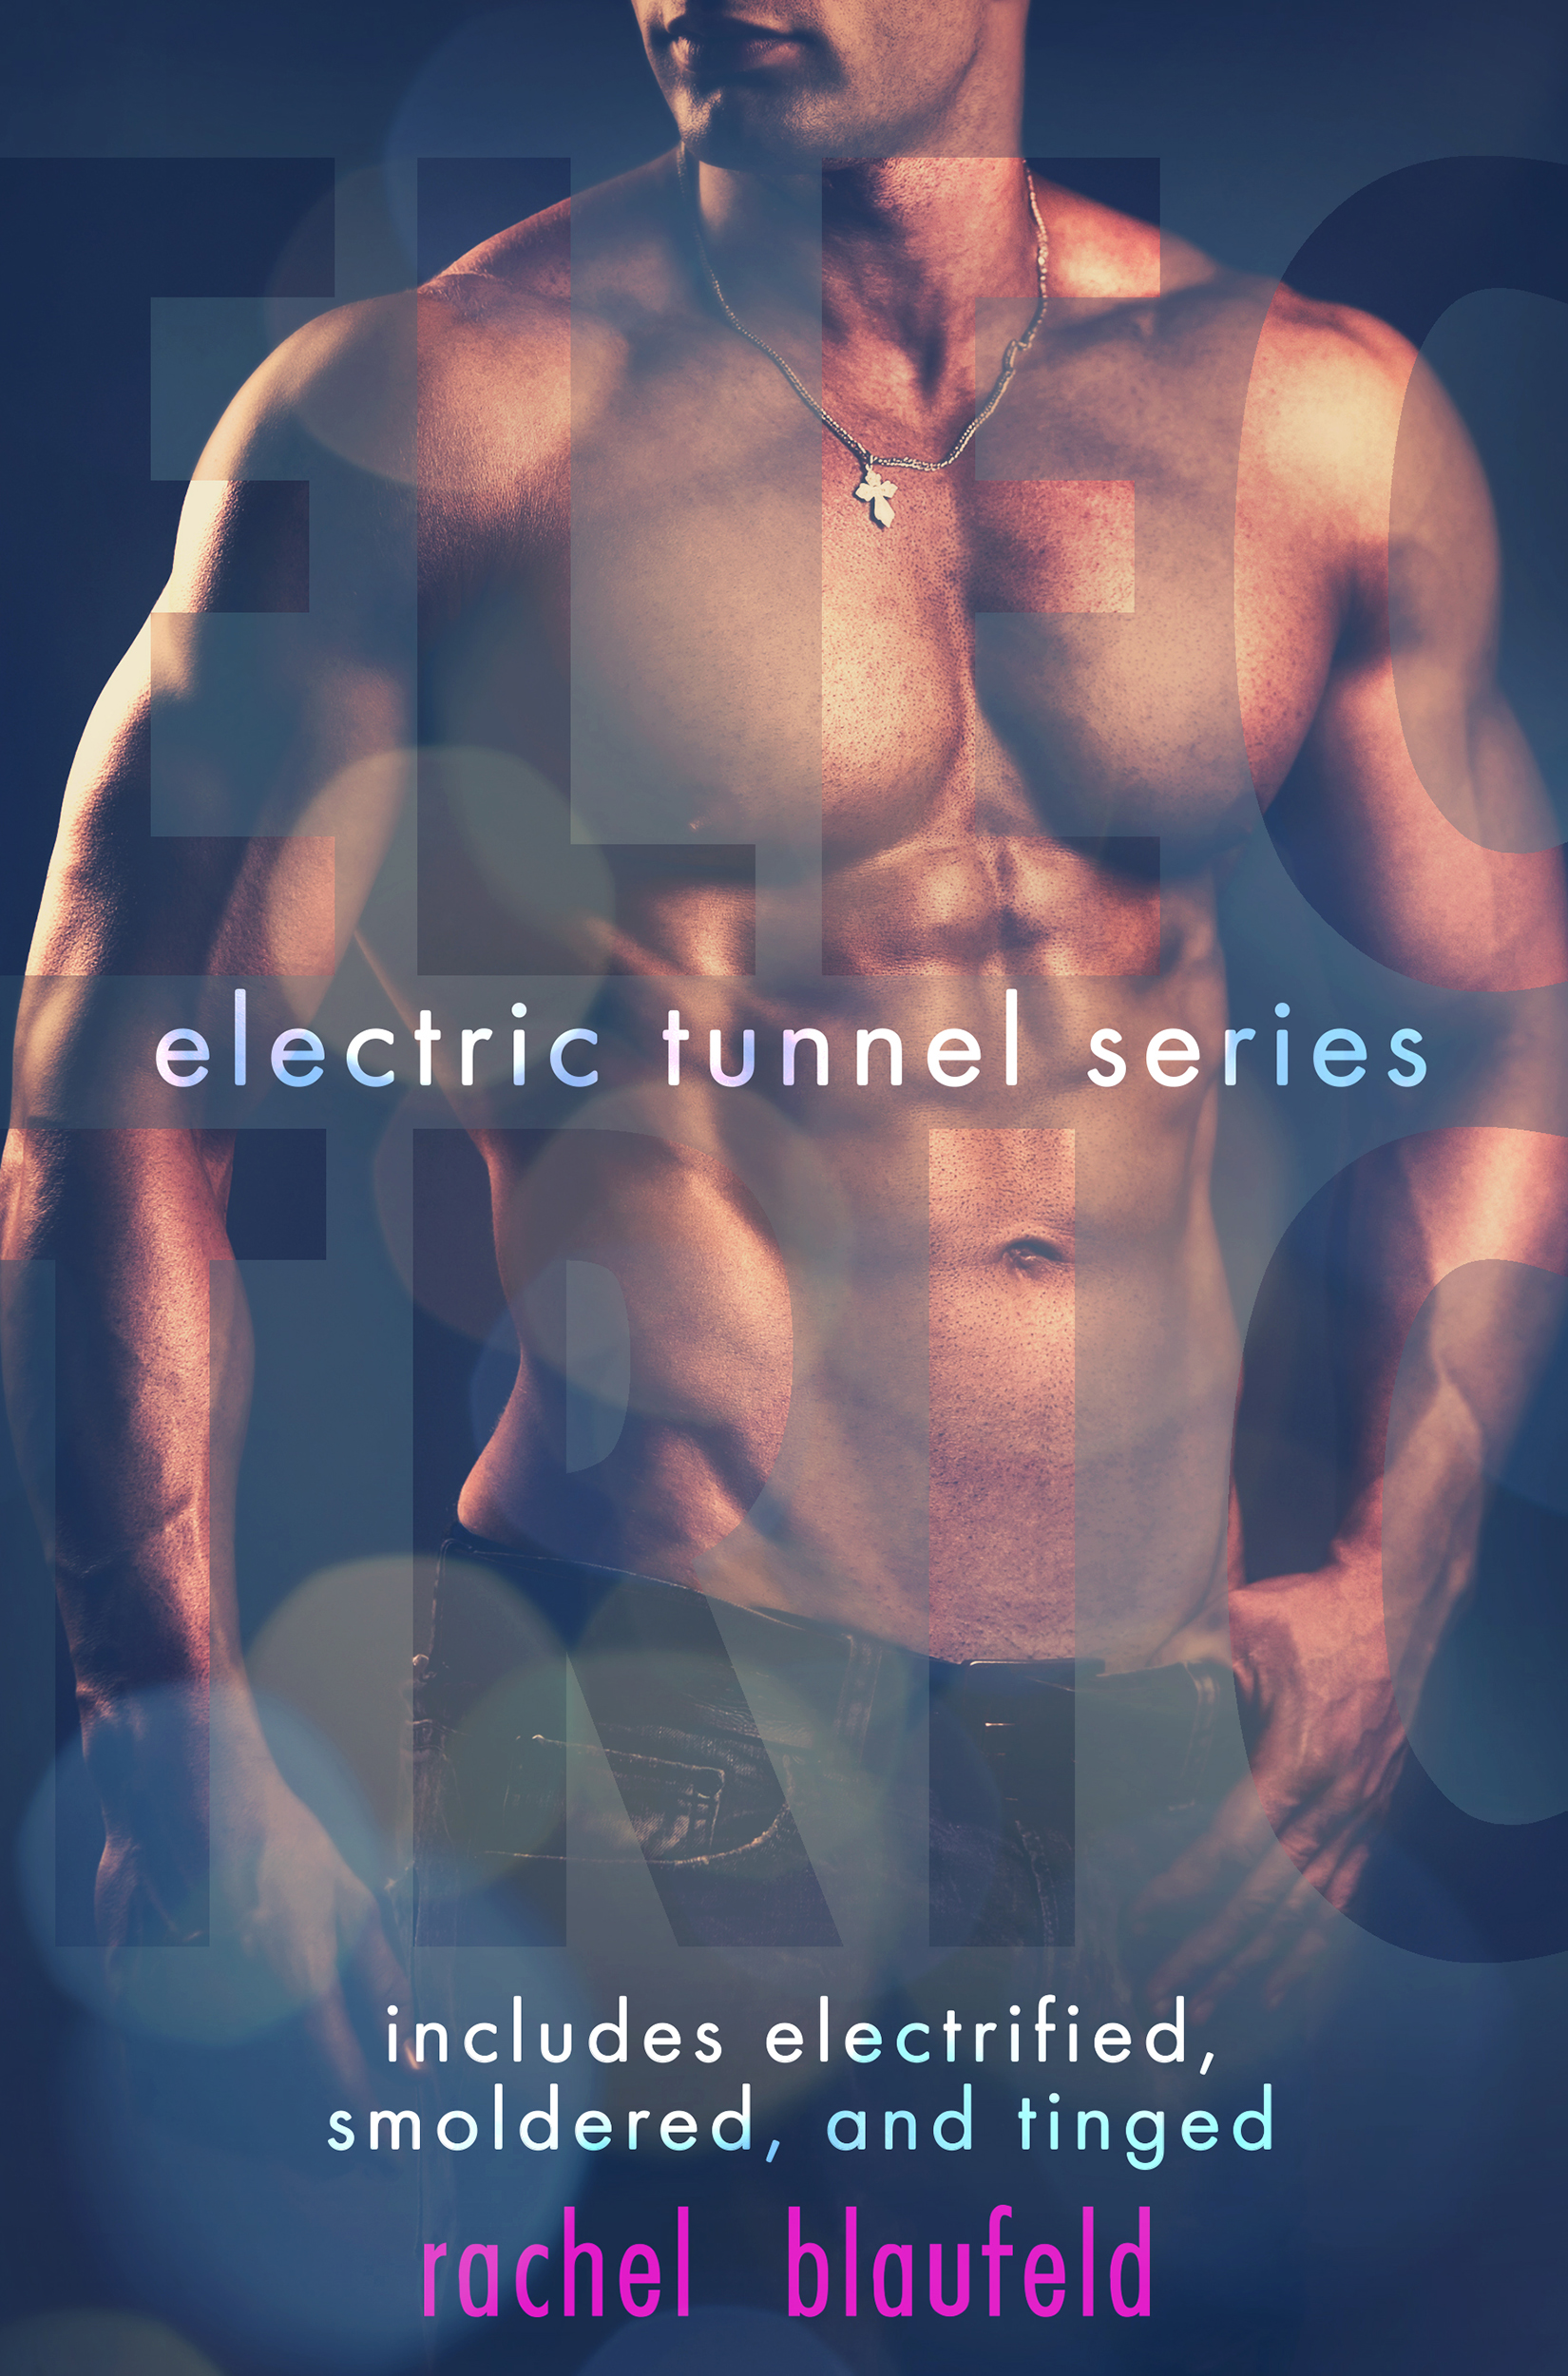 The Electric Tunnel Series